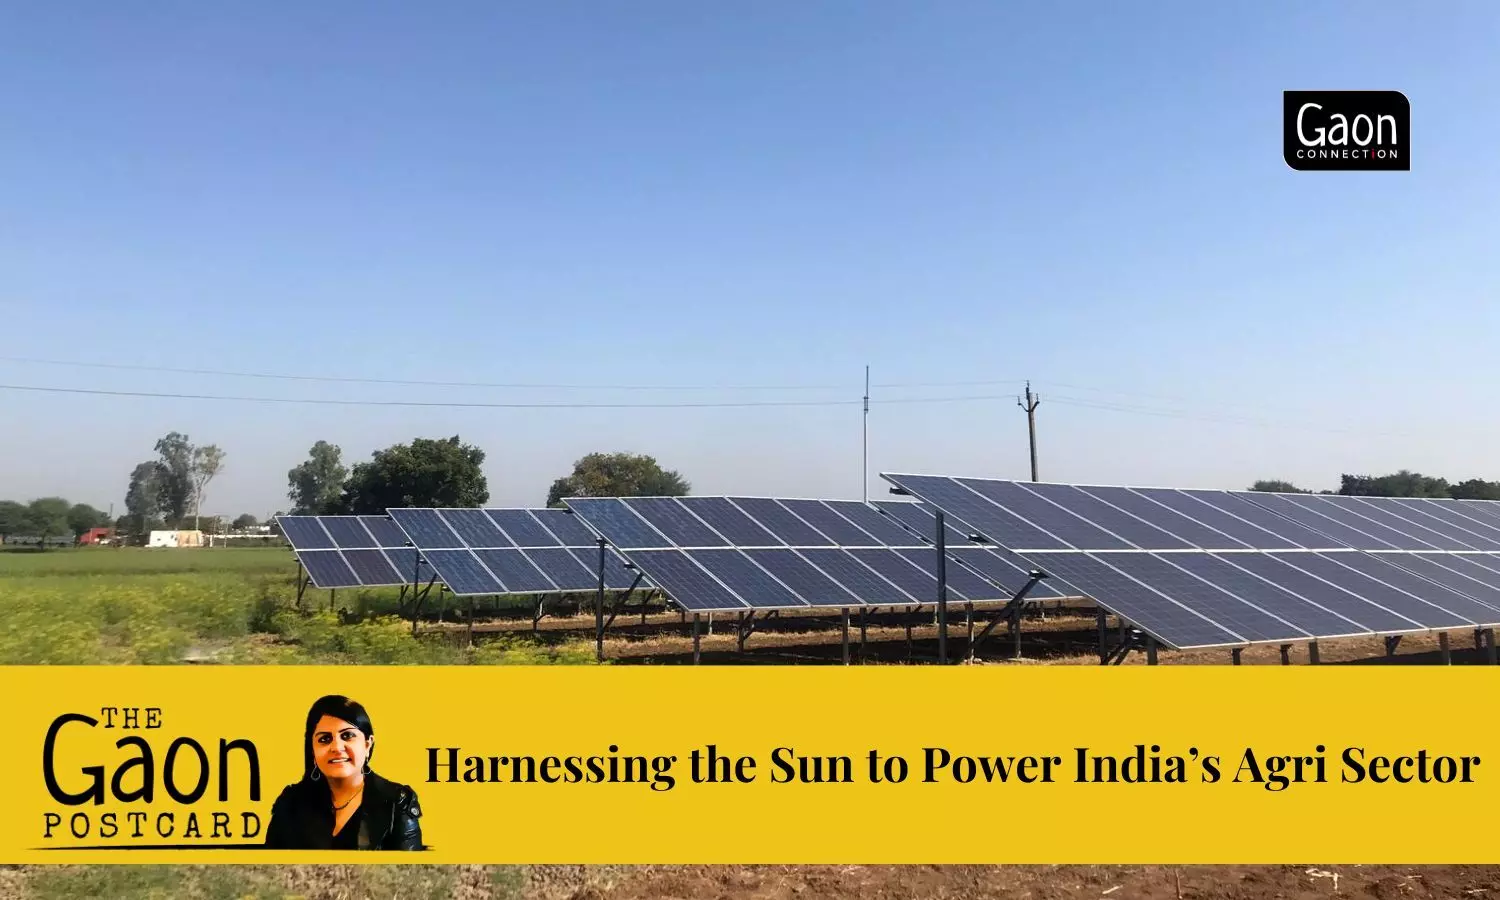 Harnessing the Sun to Power India’s Agri Sector